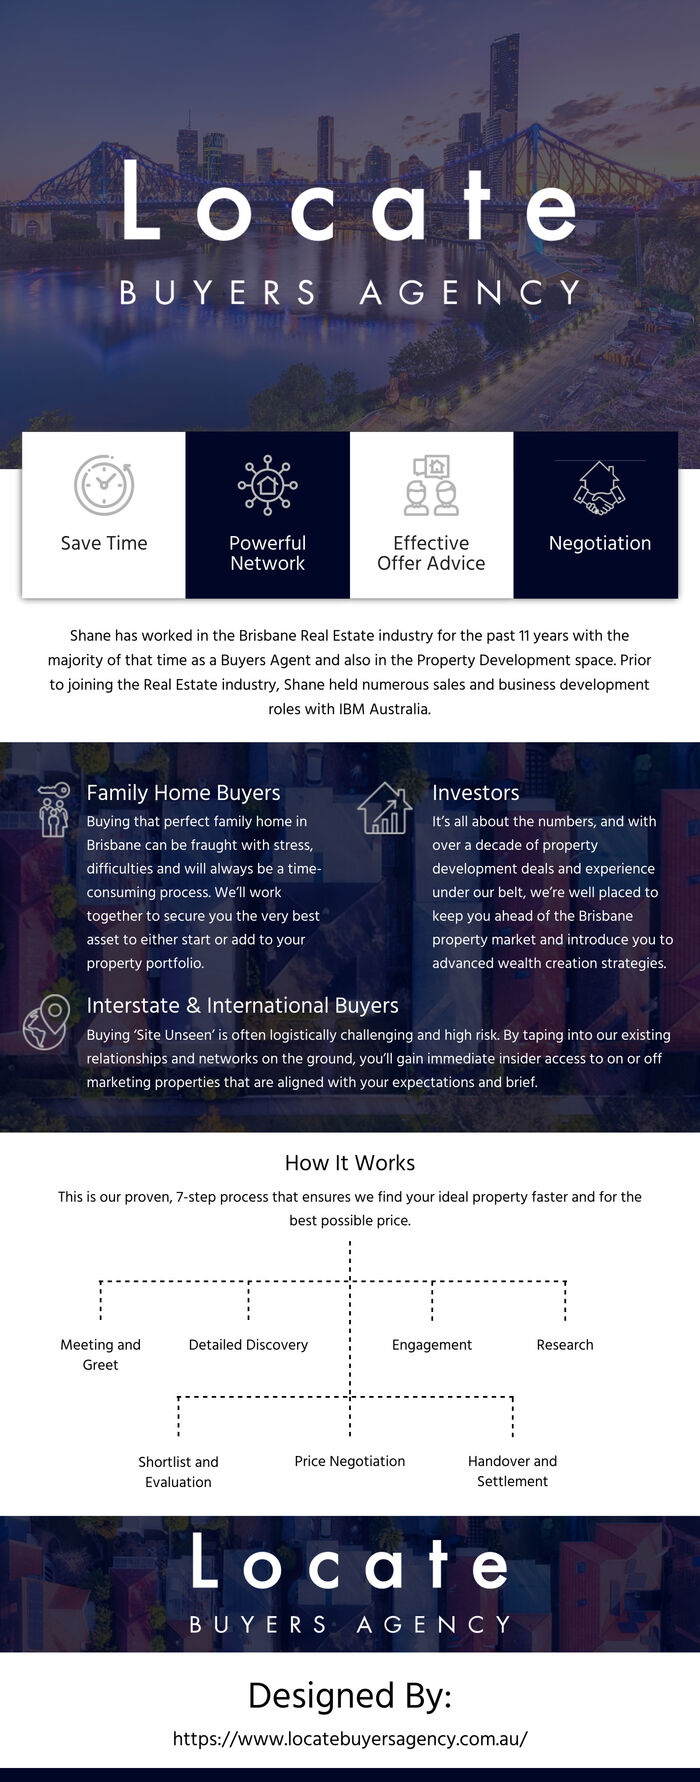 This infographic is designed by Locate Buyers Agency